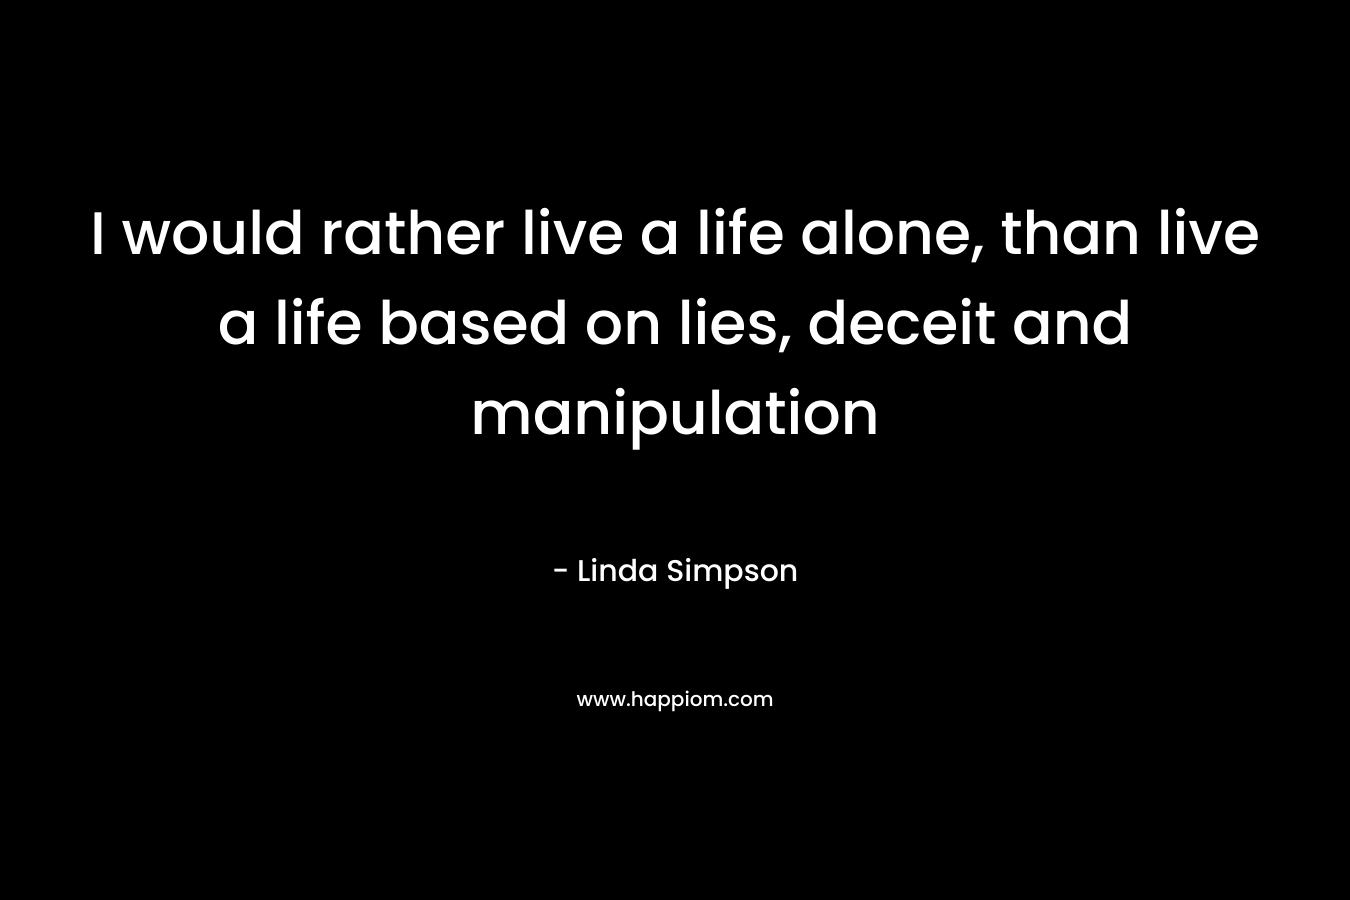 I would rather live a life alone, than live a life based on lies, deceit and manipulation